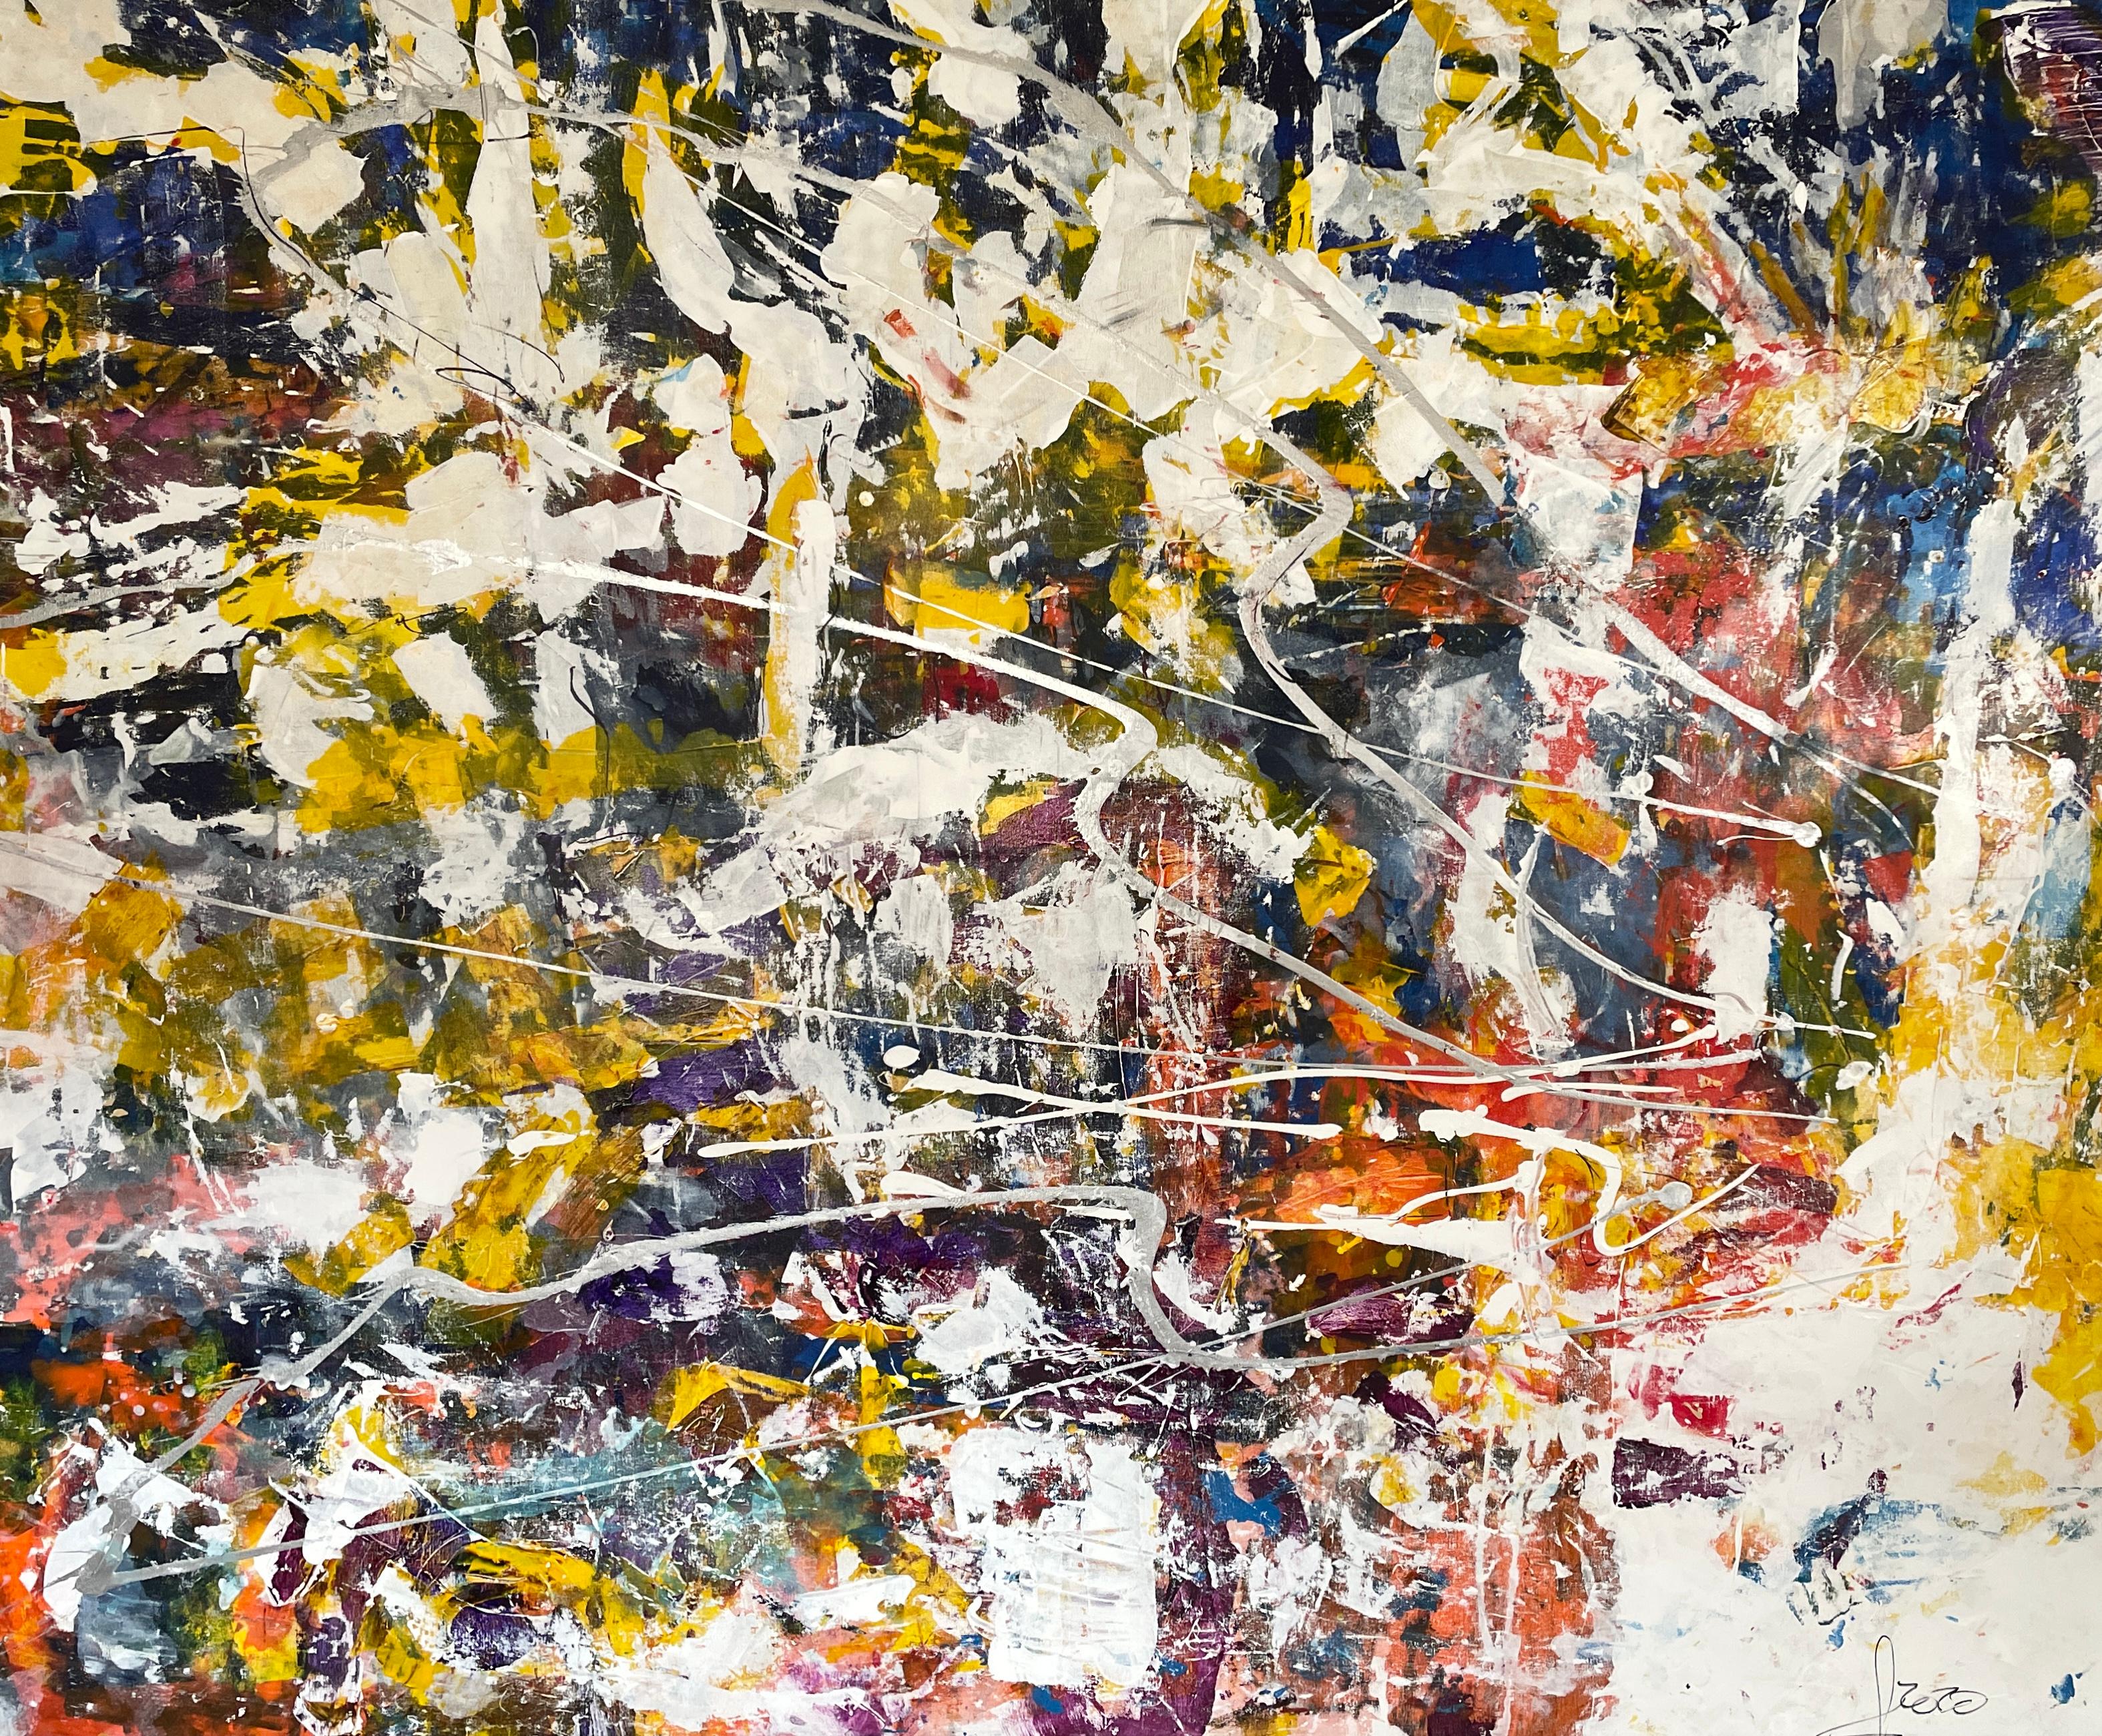 Nan Van Ryzin Abstract Painting - 'Into The Web' - Large Contemporary Splatter - Abstract Expressionism